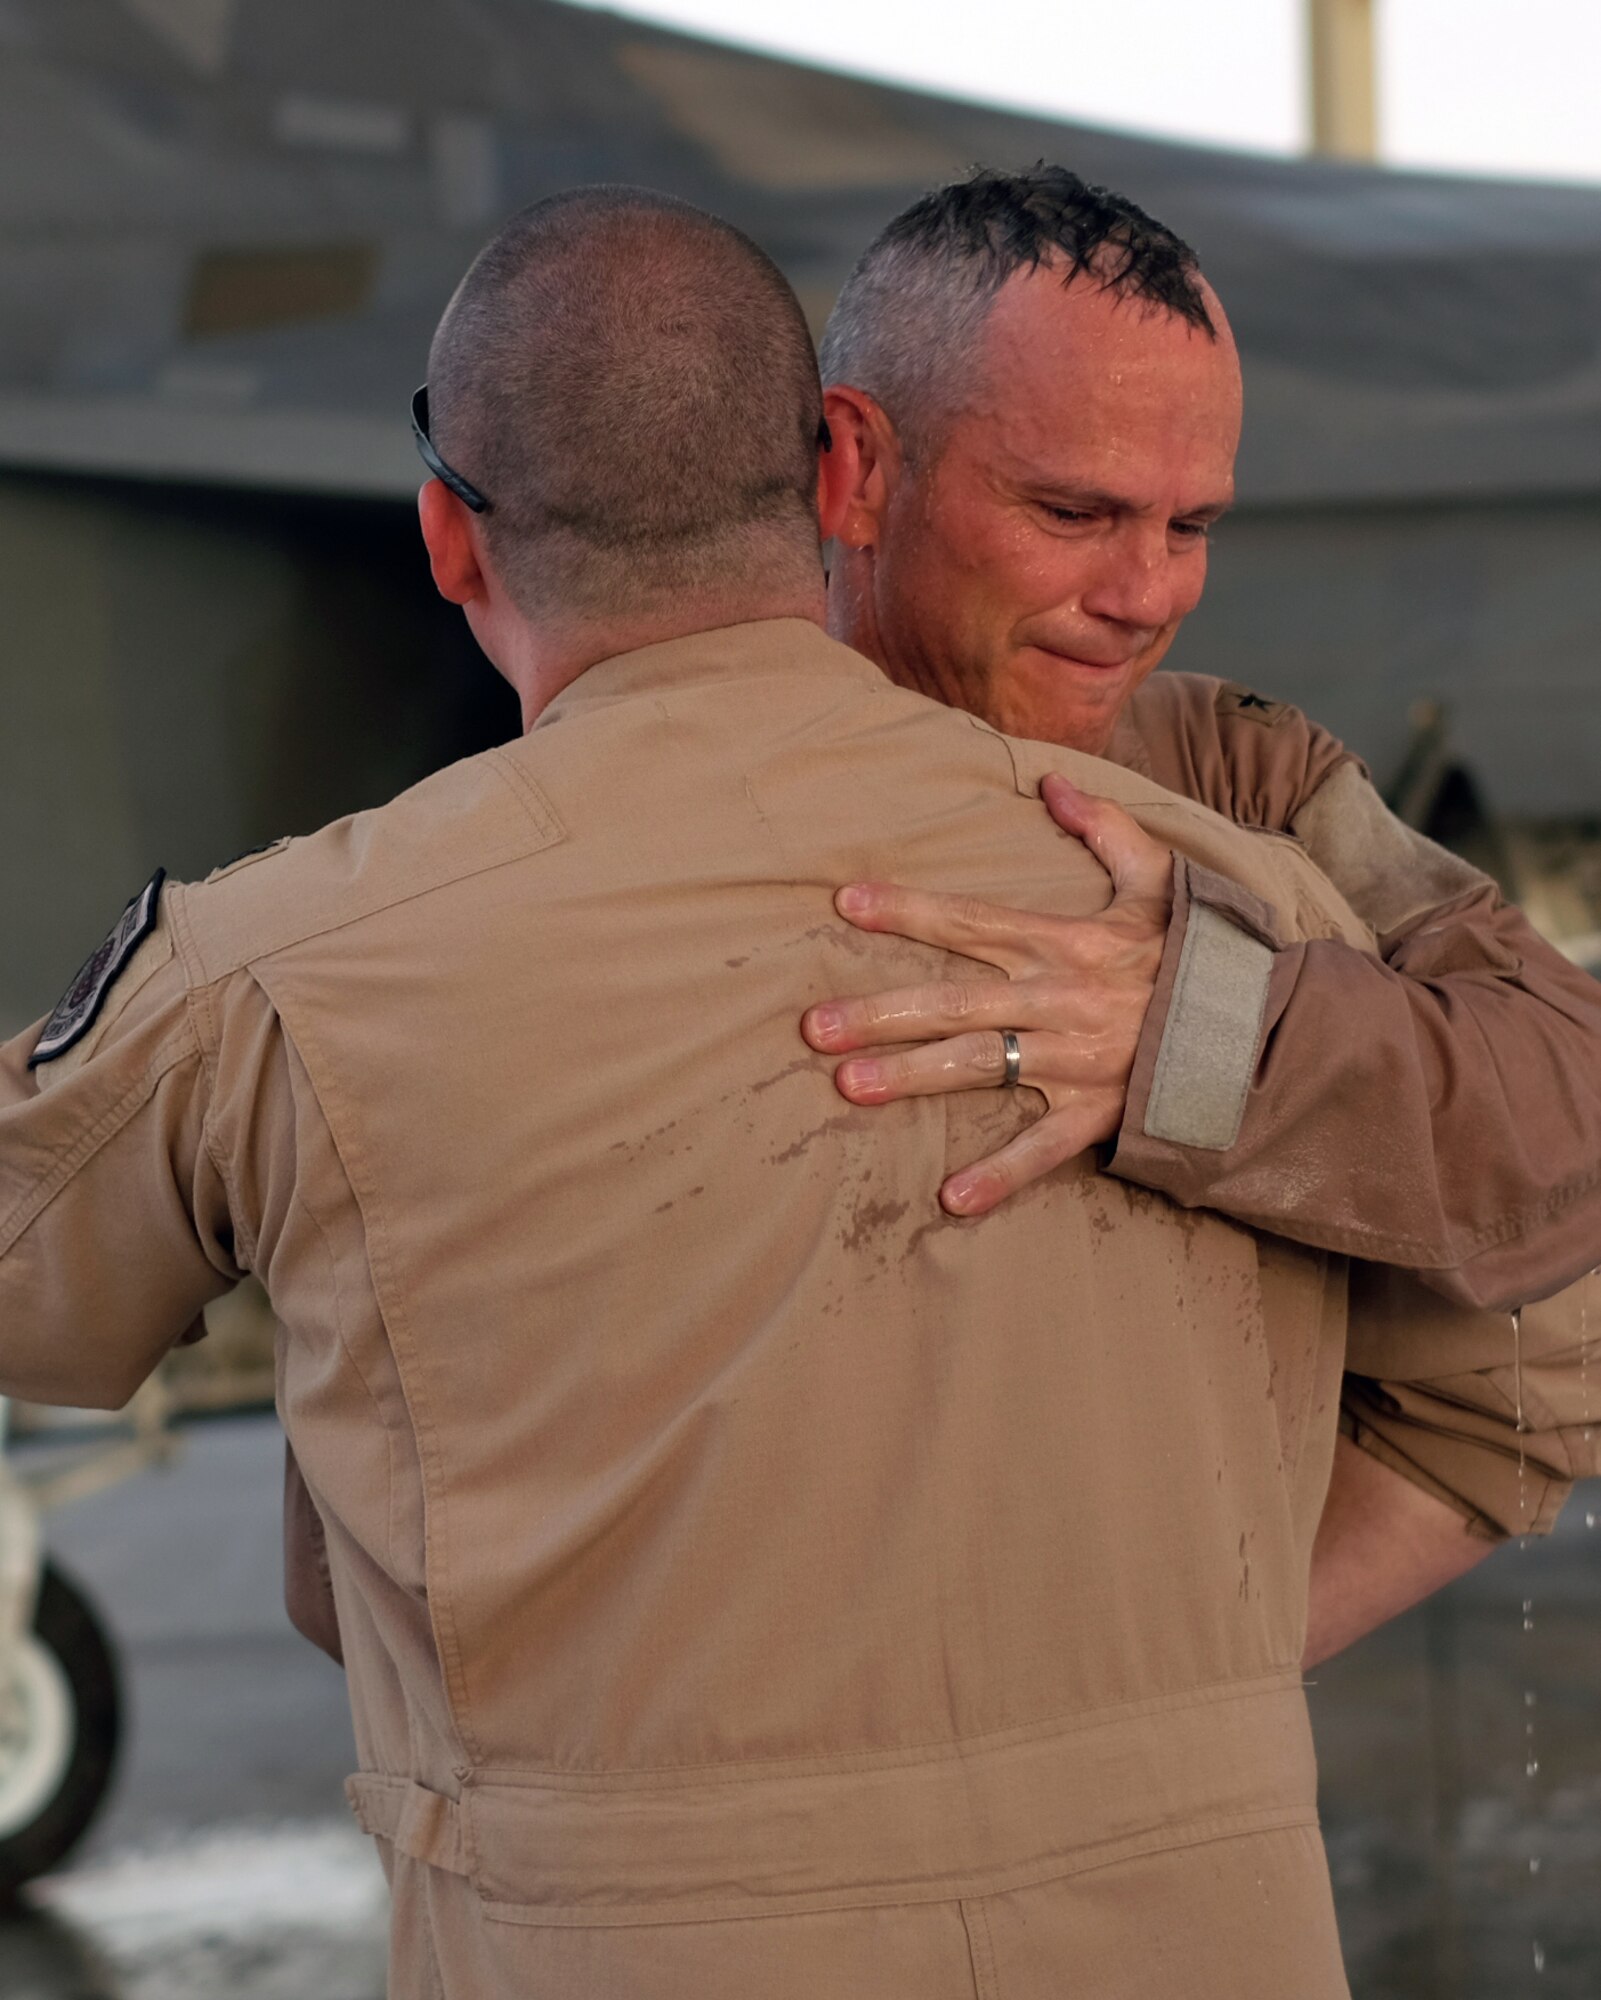 Brig. Gen. Charles S. Corcoran, 380th Air Expeditionary Wing commander, embraces Lt. Col. "Shell", 27th Expeditionary Fighter Squadron commander, at his fini-flight June 30, 2017, at an undisclosed location in southwest Asia. Shell, an F-22 pilot himself, has known the general since Corcoran was a major. (U.S. Air Force photo by Senior Airman Preston Webb)